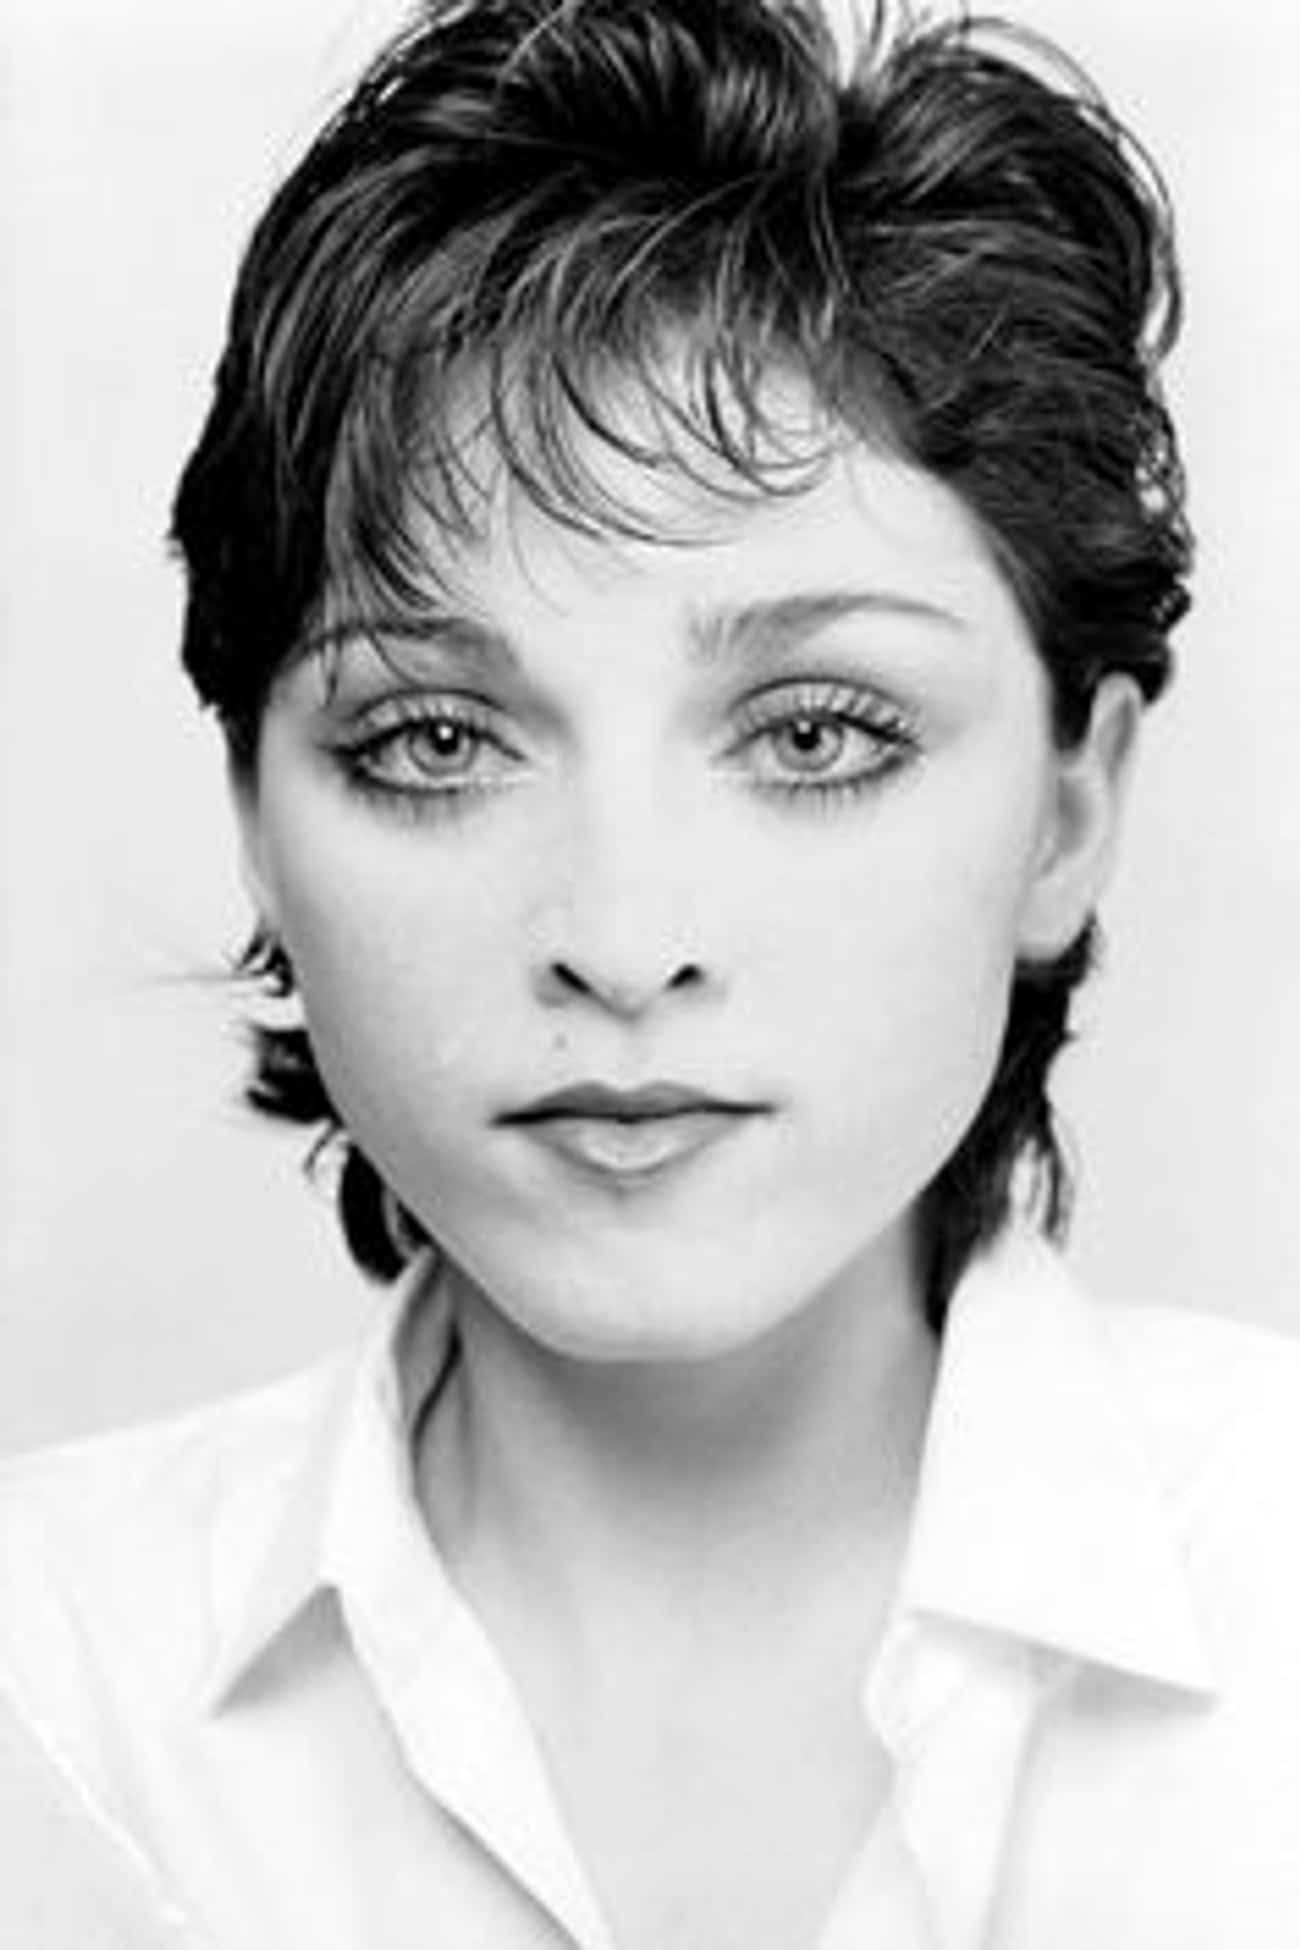 Young Madonna With Different Hair-do